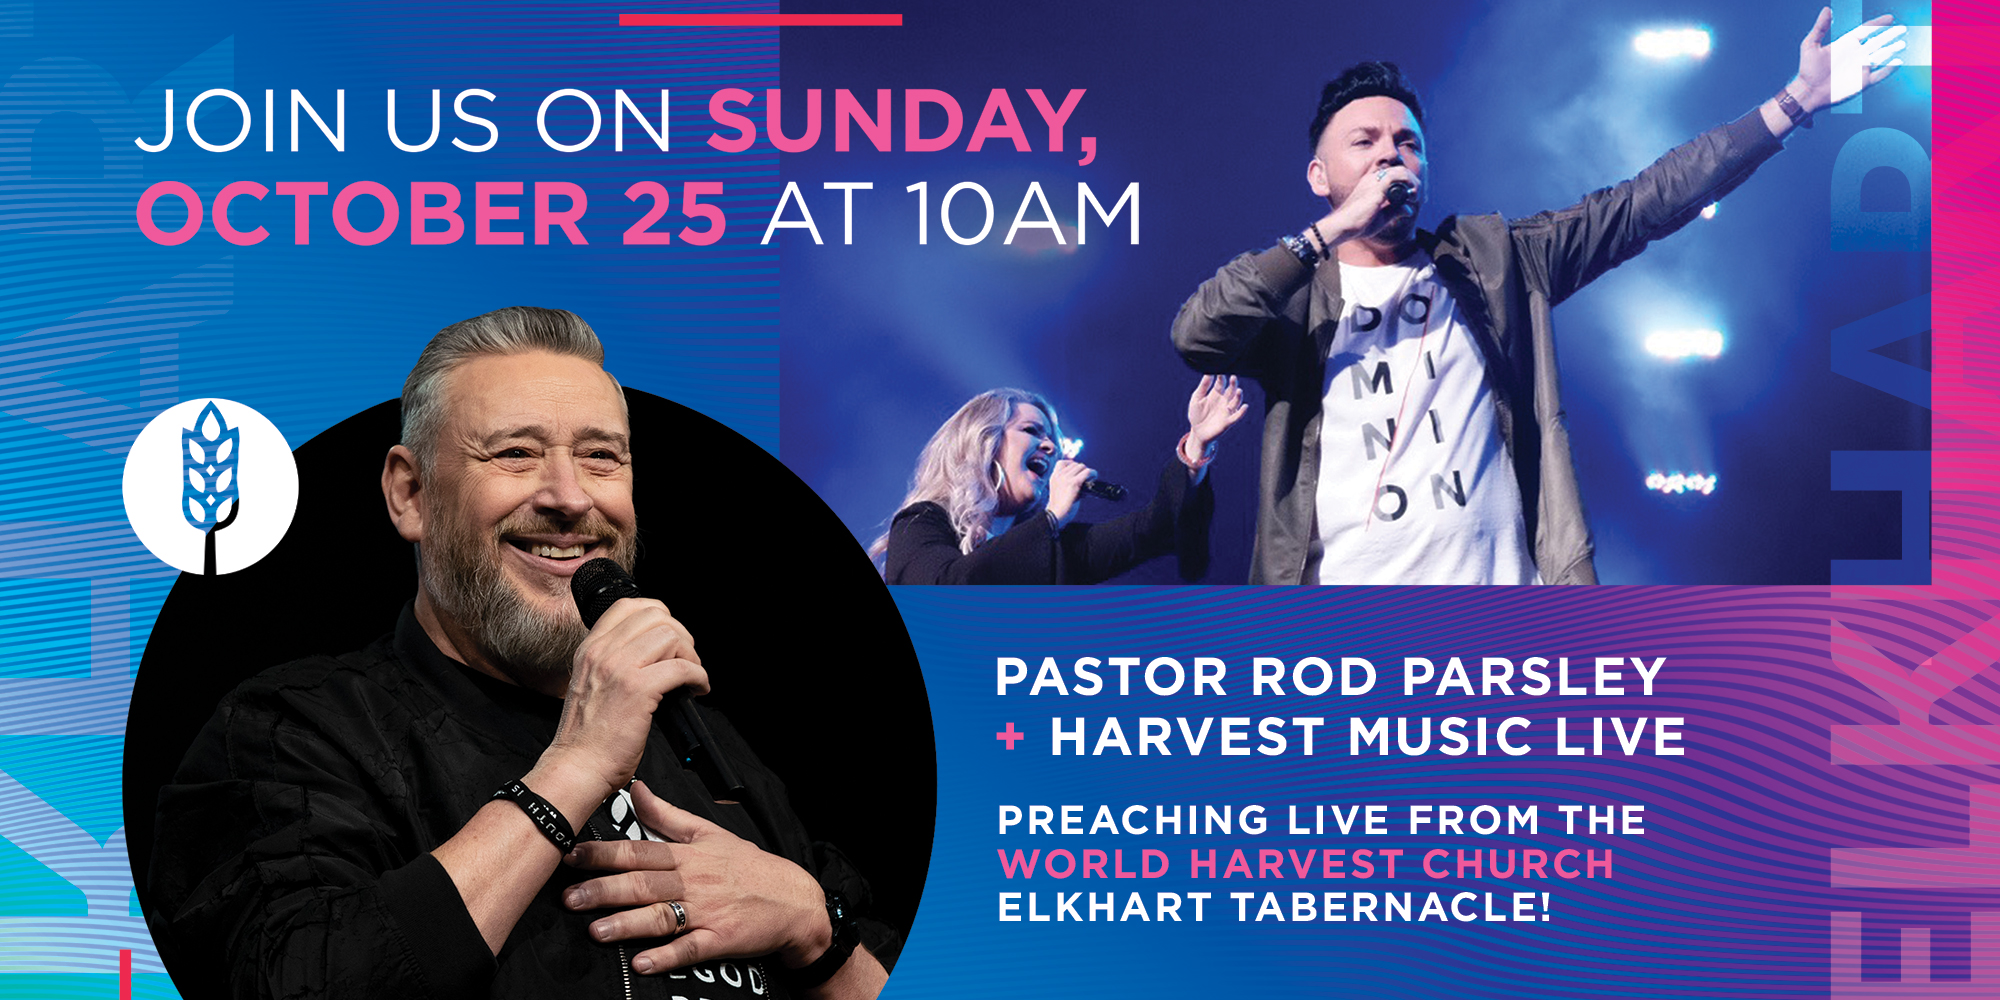 Join Us on Sunday, October 25 at 10am Pastor Rod Parsley and Harvest Music Live Preaching Live from the World Harvest Church Elkhart Tabernacle!